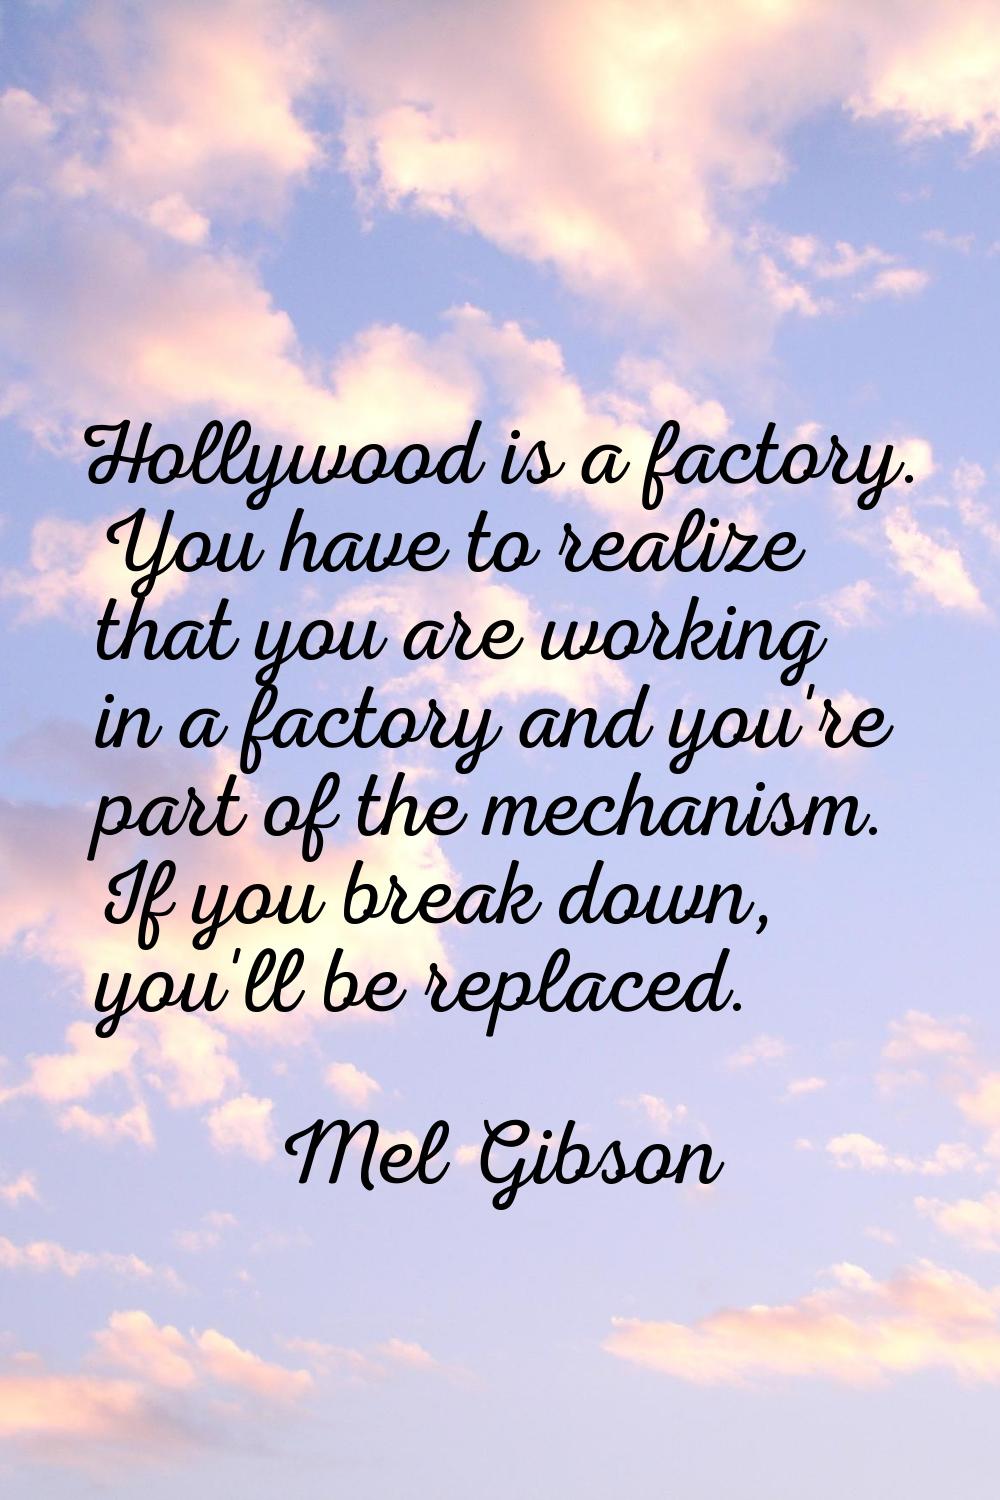 Hollywood is a factory. You have to realize that you are working in a factory and you're part of th